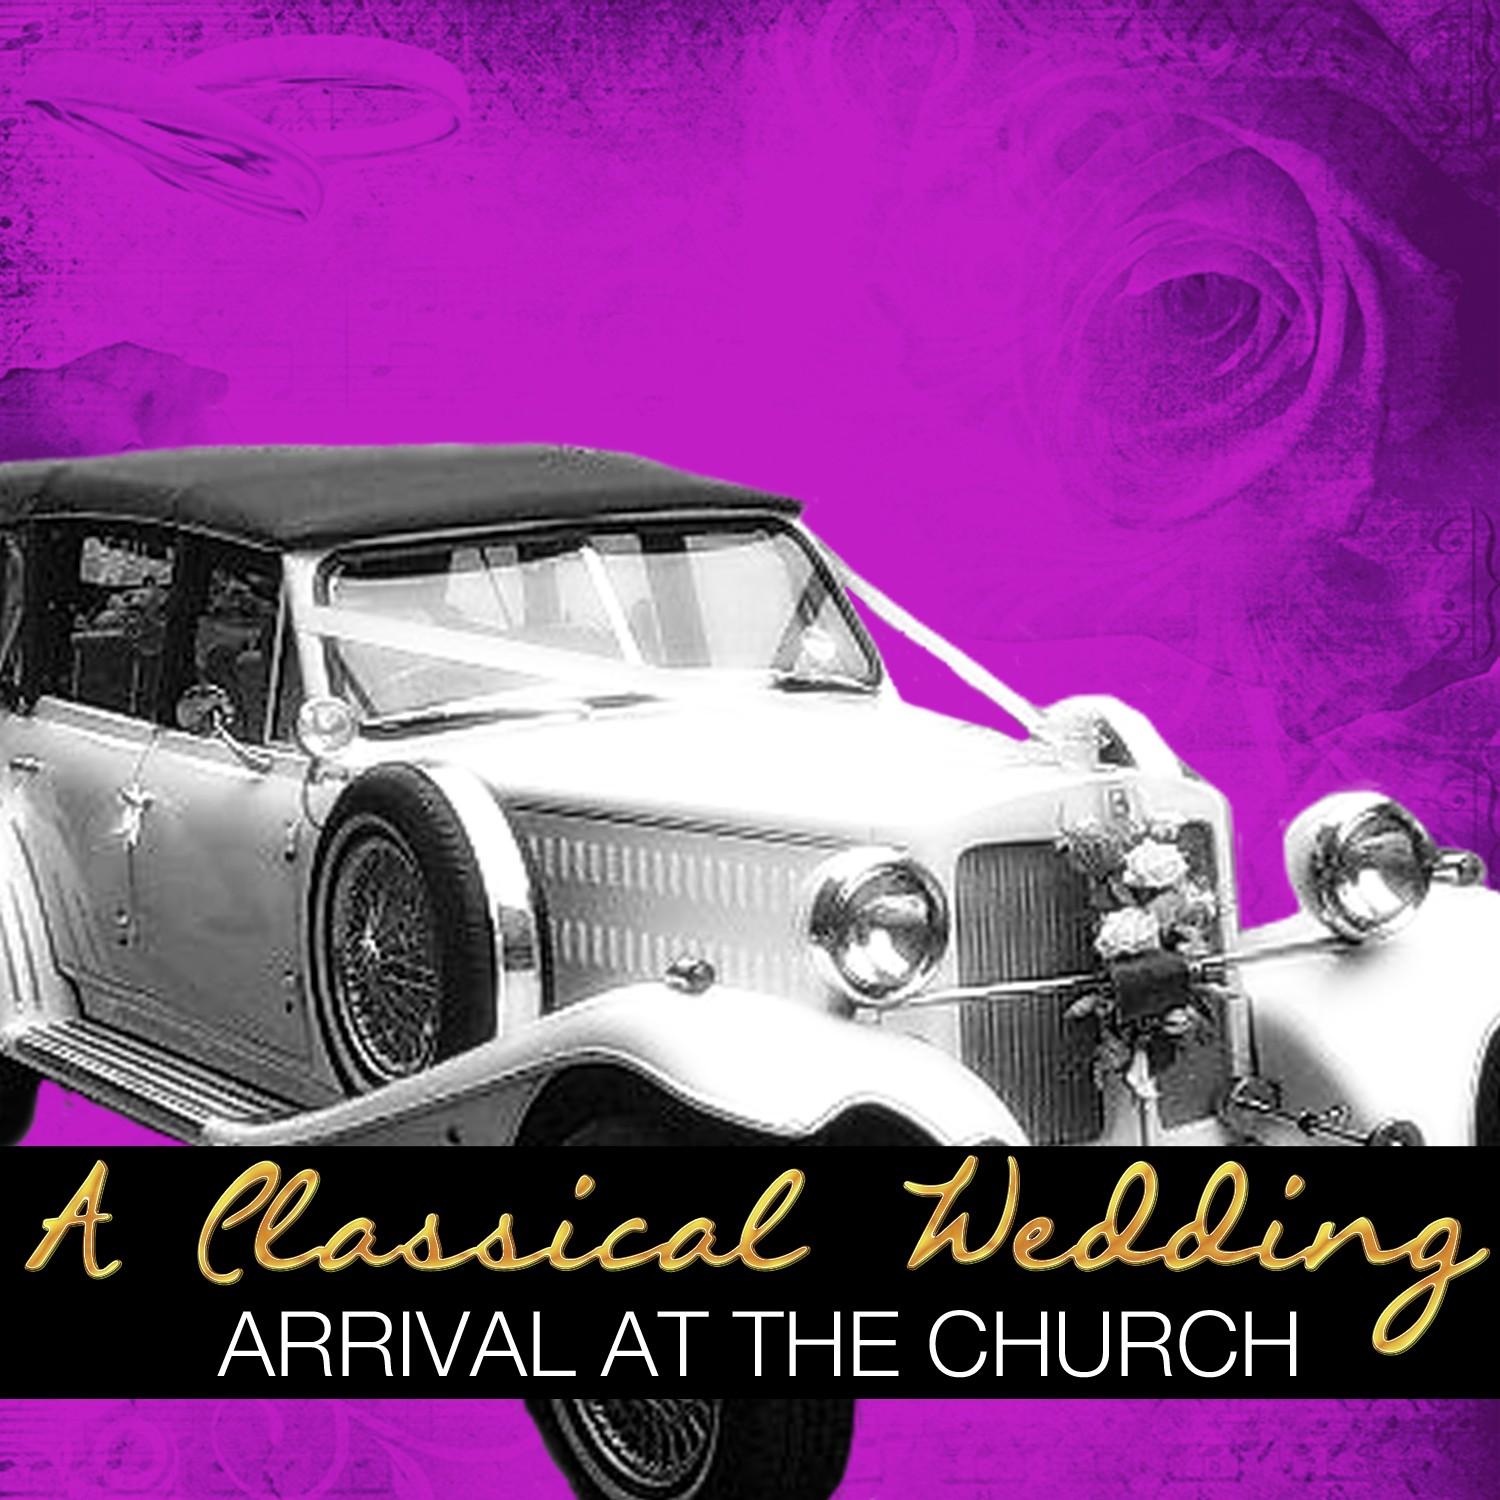 A Classical Wedding: Arrival at the Church